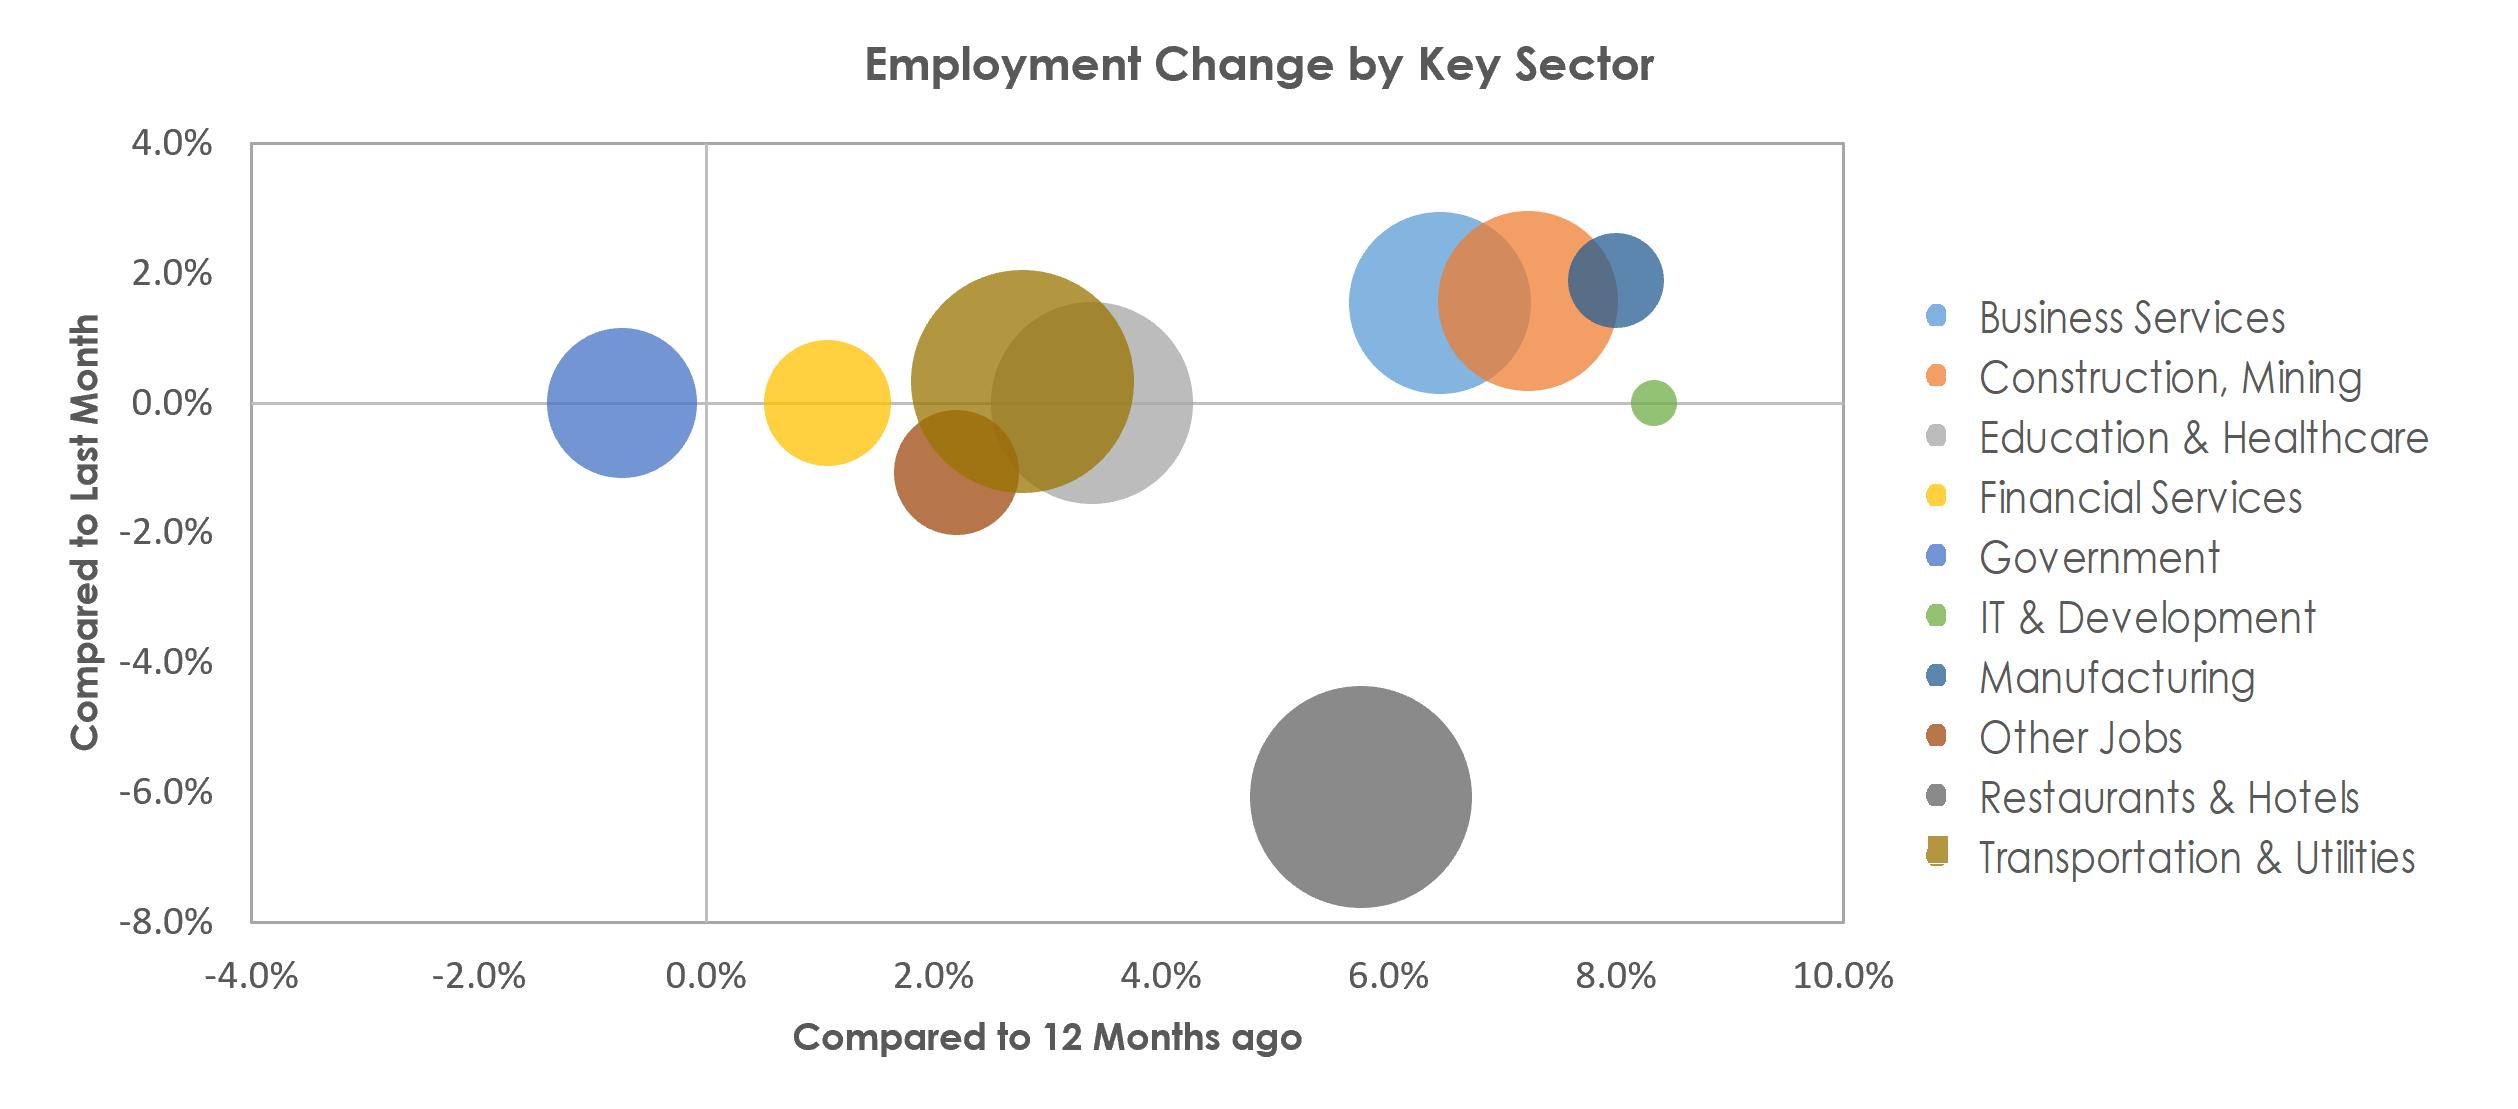 Naples-Immokalee-Marco Island, FL Unemployment by Industry May 2022